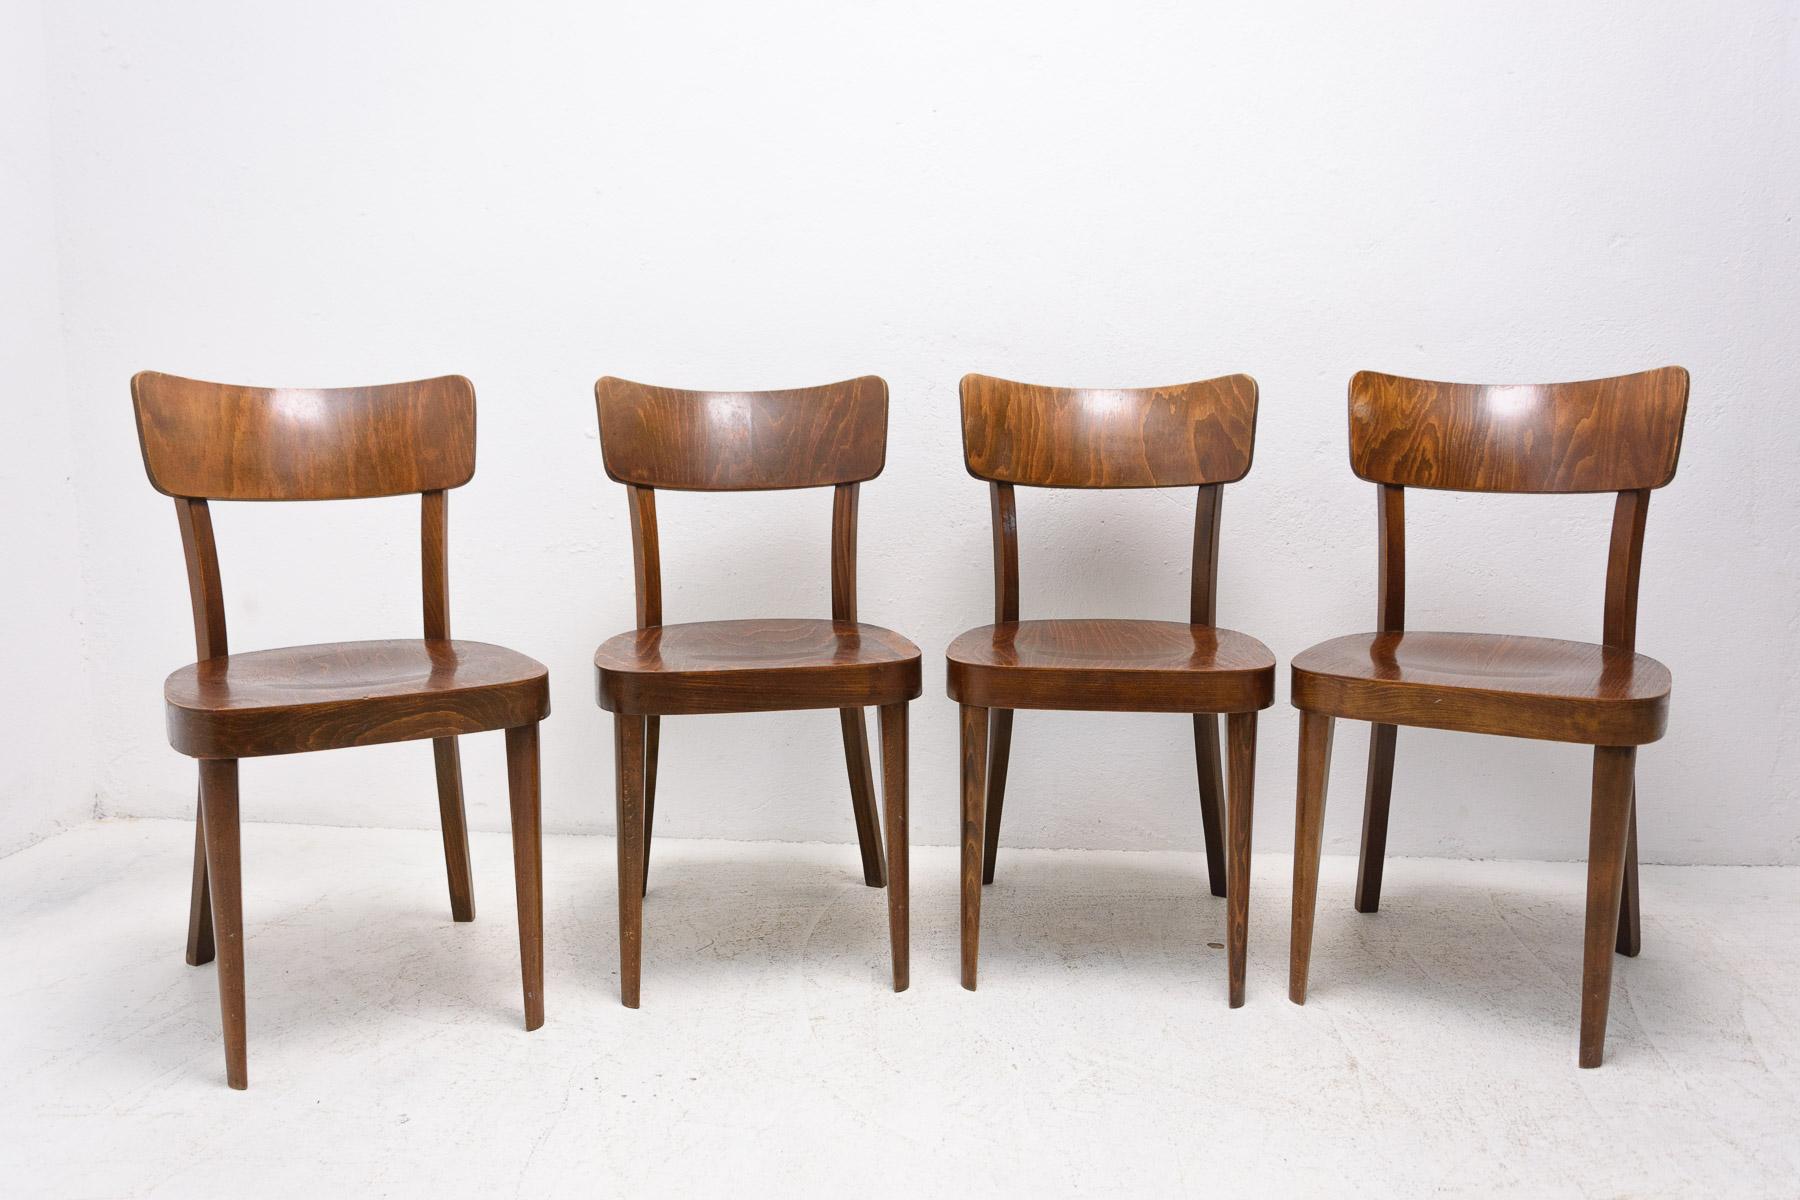 Set of four dining chairs TON, made in the Czechoslovakia in the 1950´s. It´s made of wood in walnut veneer. In very good Vintage condition. Price is for the set of four.

Measures: Height: 82 cm

Seat: 44×47 cm

Seat height: 47 cm.